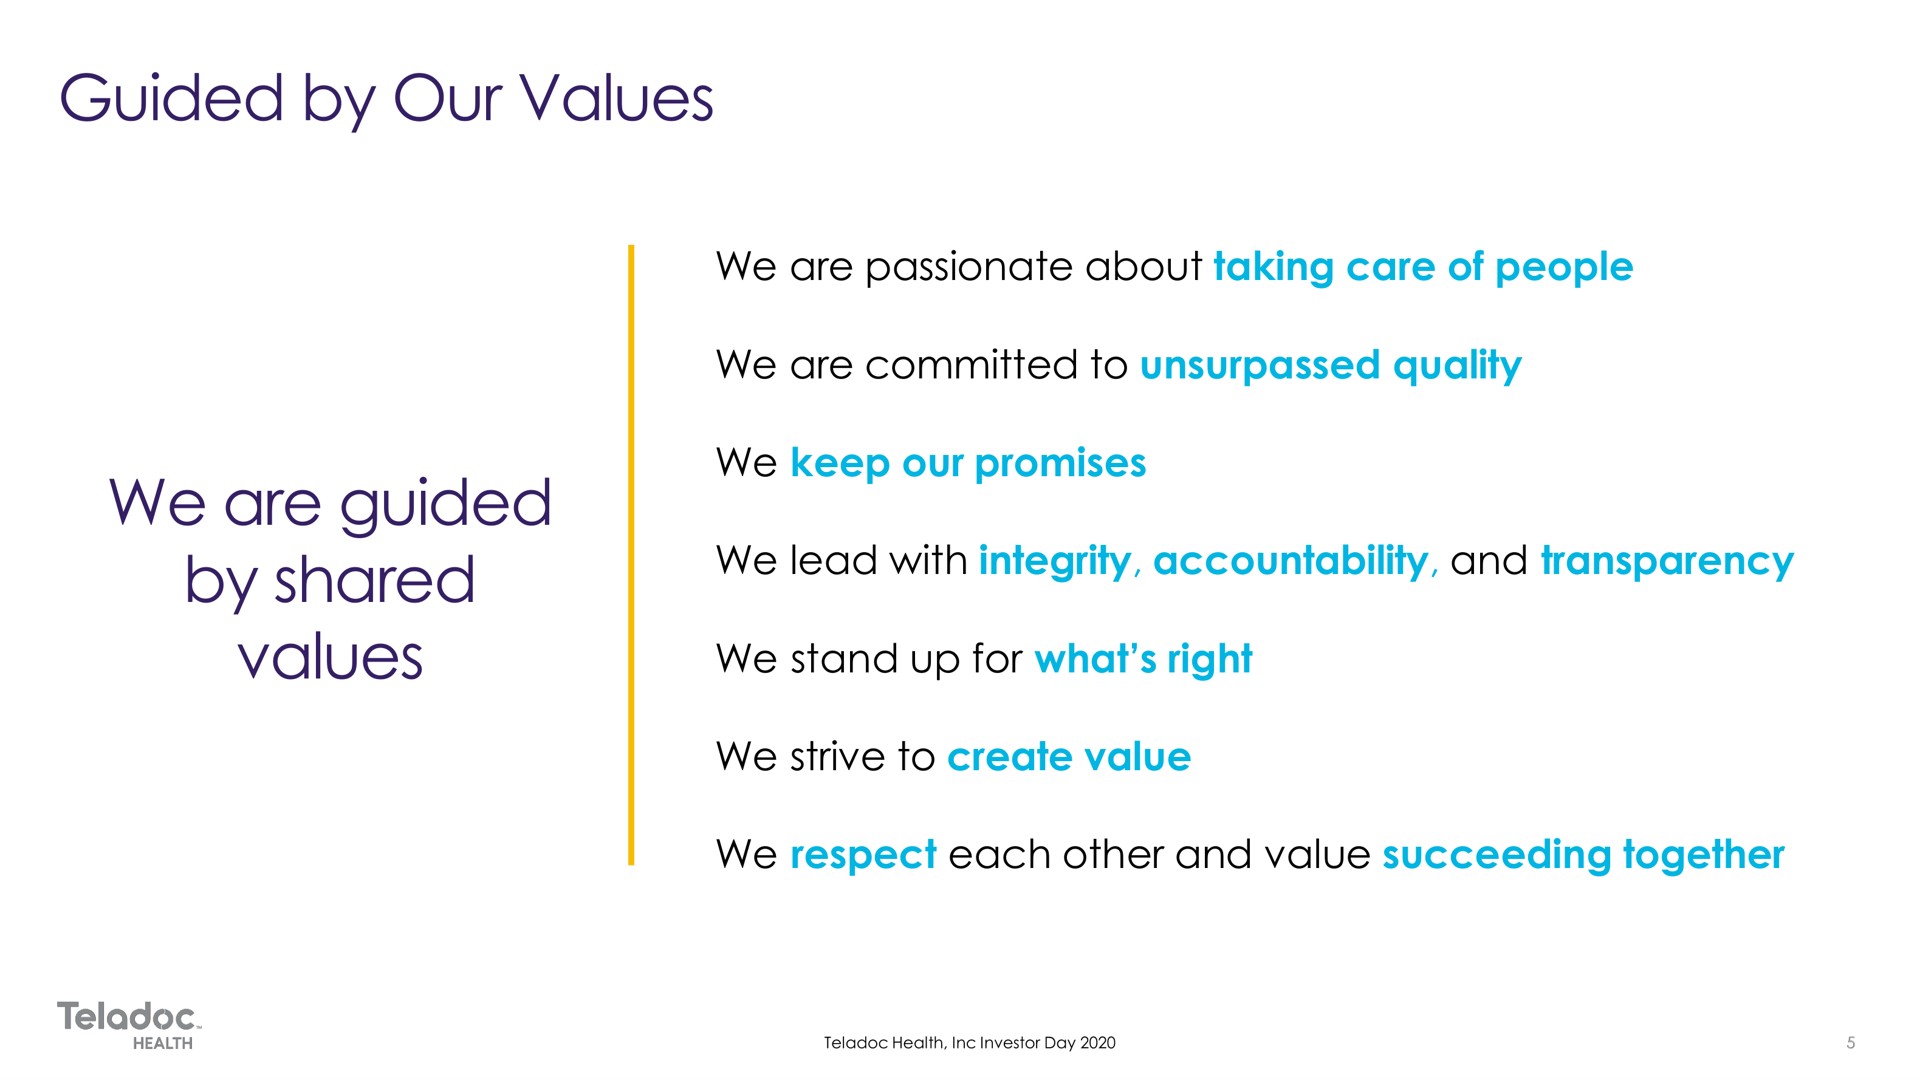 we are guided by shared values we are passionate about taking care of people we are committed to unsurpassed quality we keep our promises we lead with integrity accountability and transparency we stand up for what right we strive to create value we respect each other and value succeeding together | Teladoc